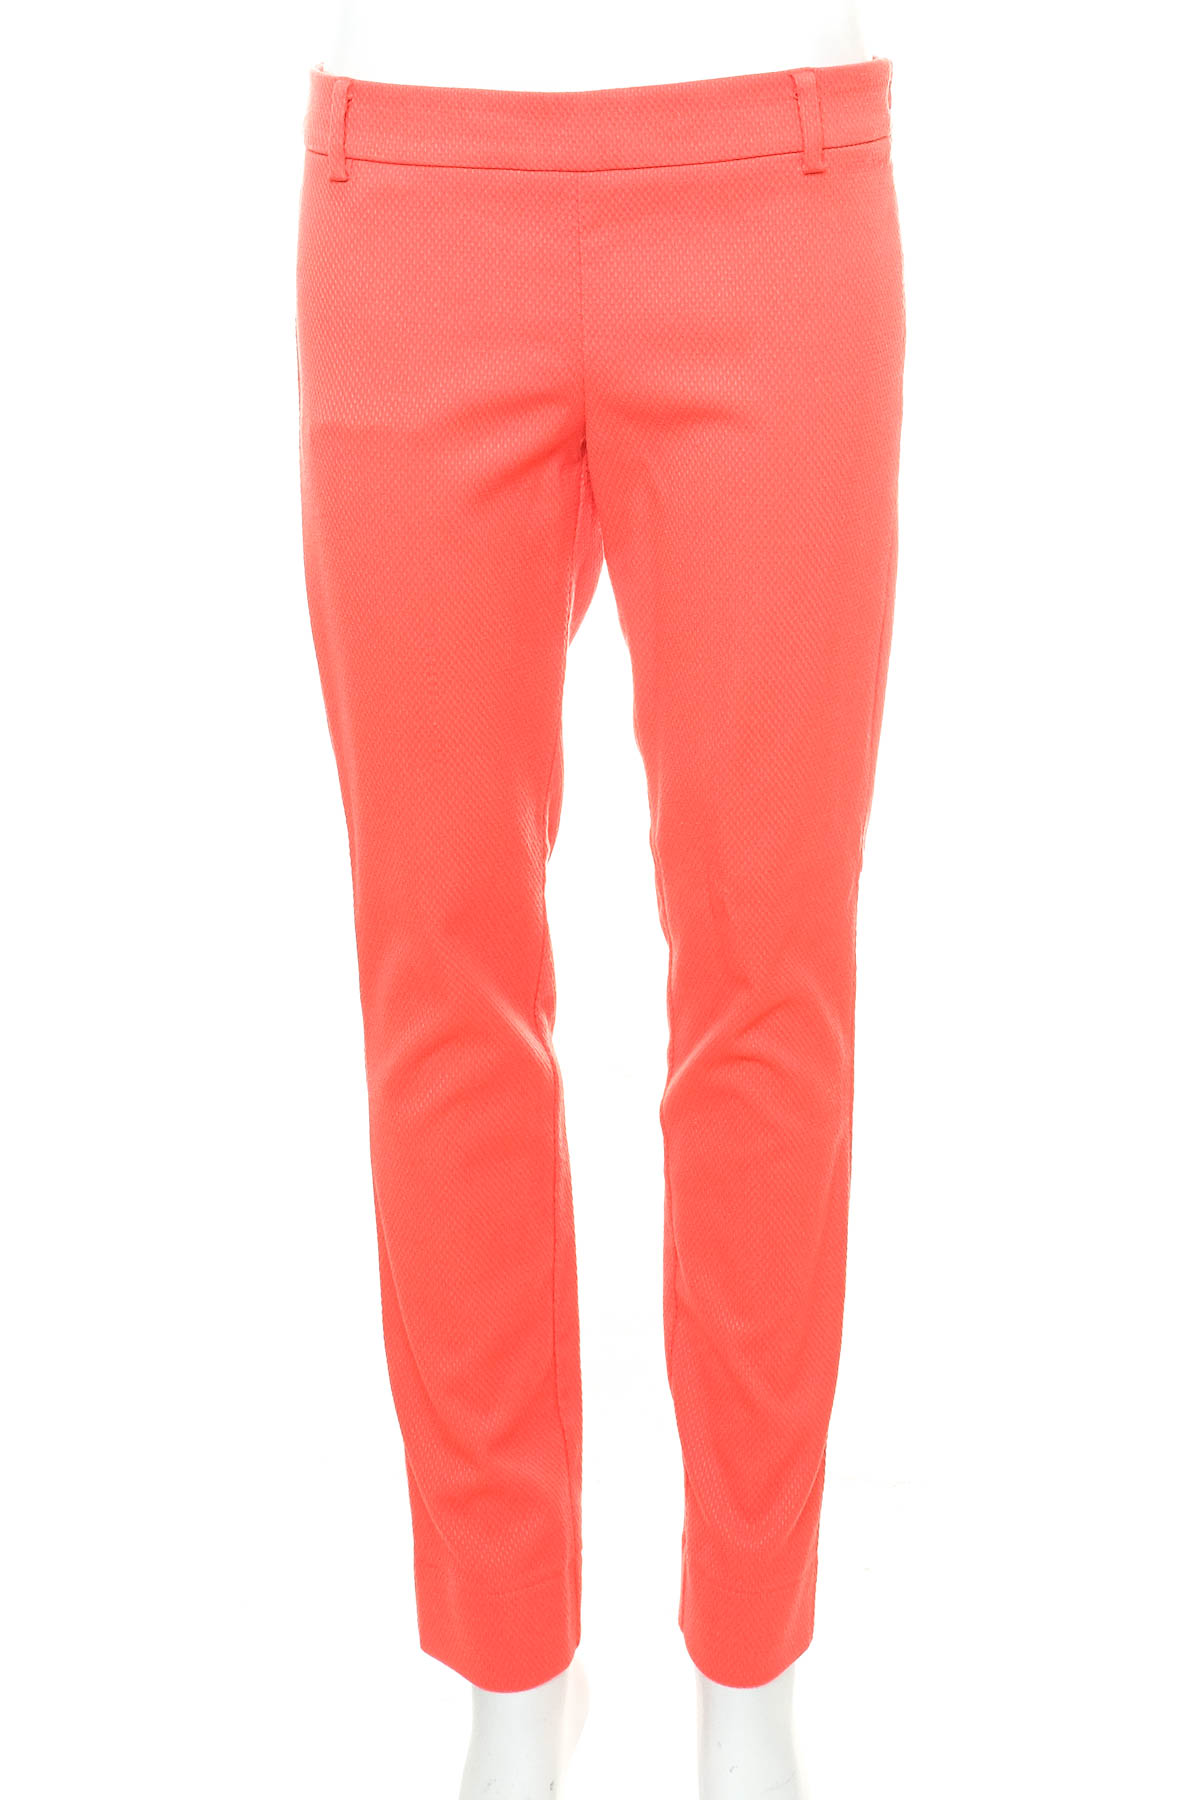 Women's trousers - United Colors of Benetton - 0